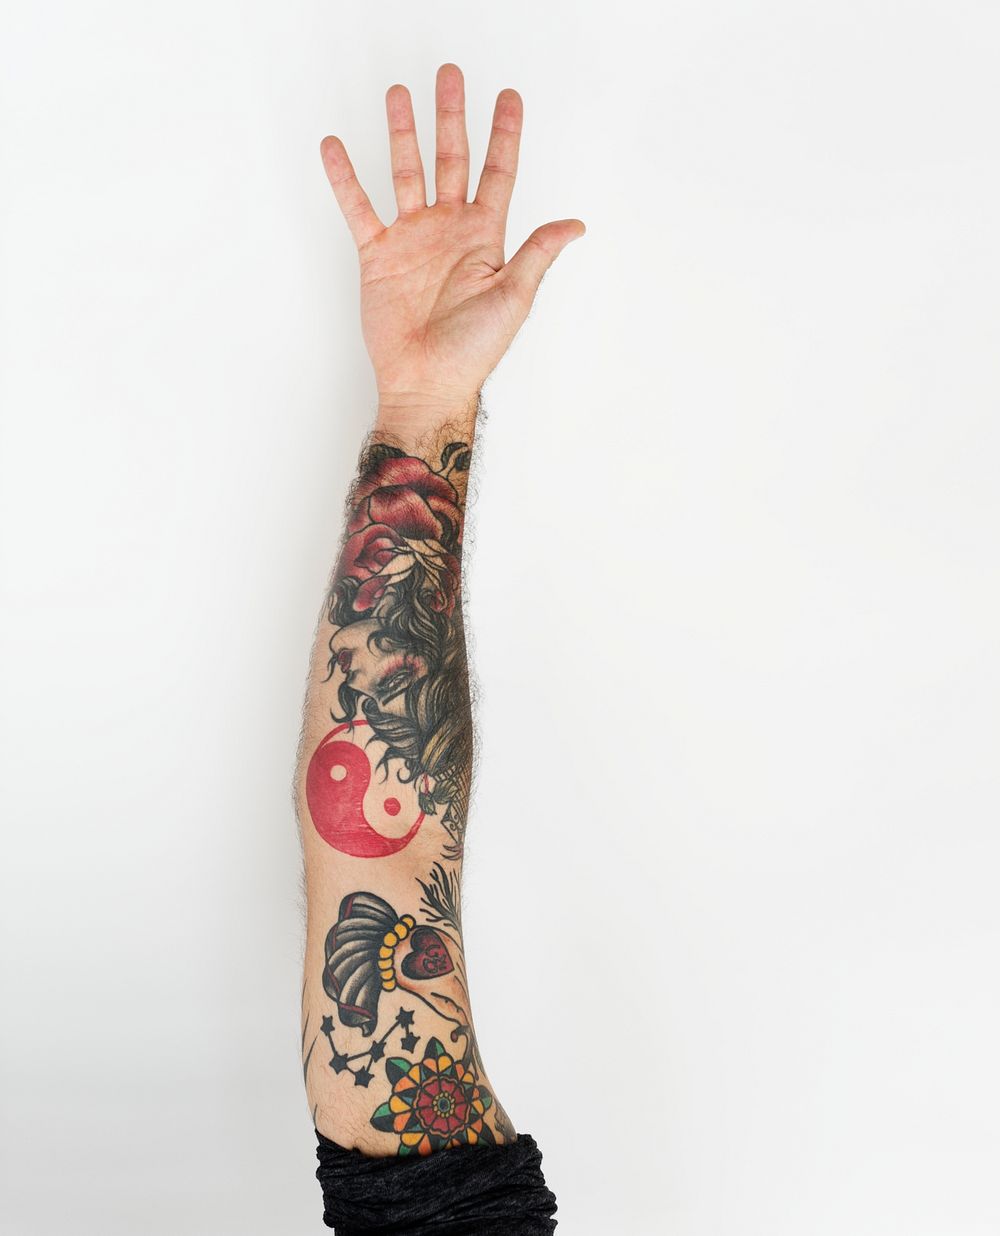 Tattooed hand of a man oustretched